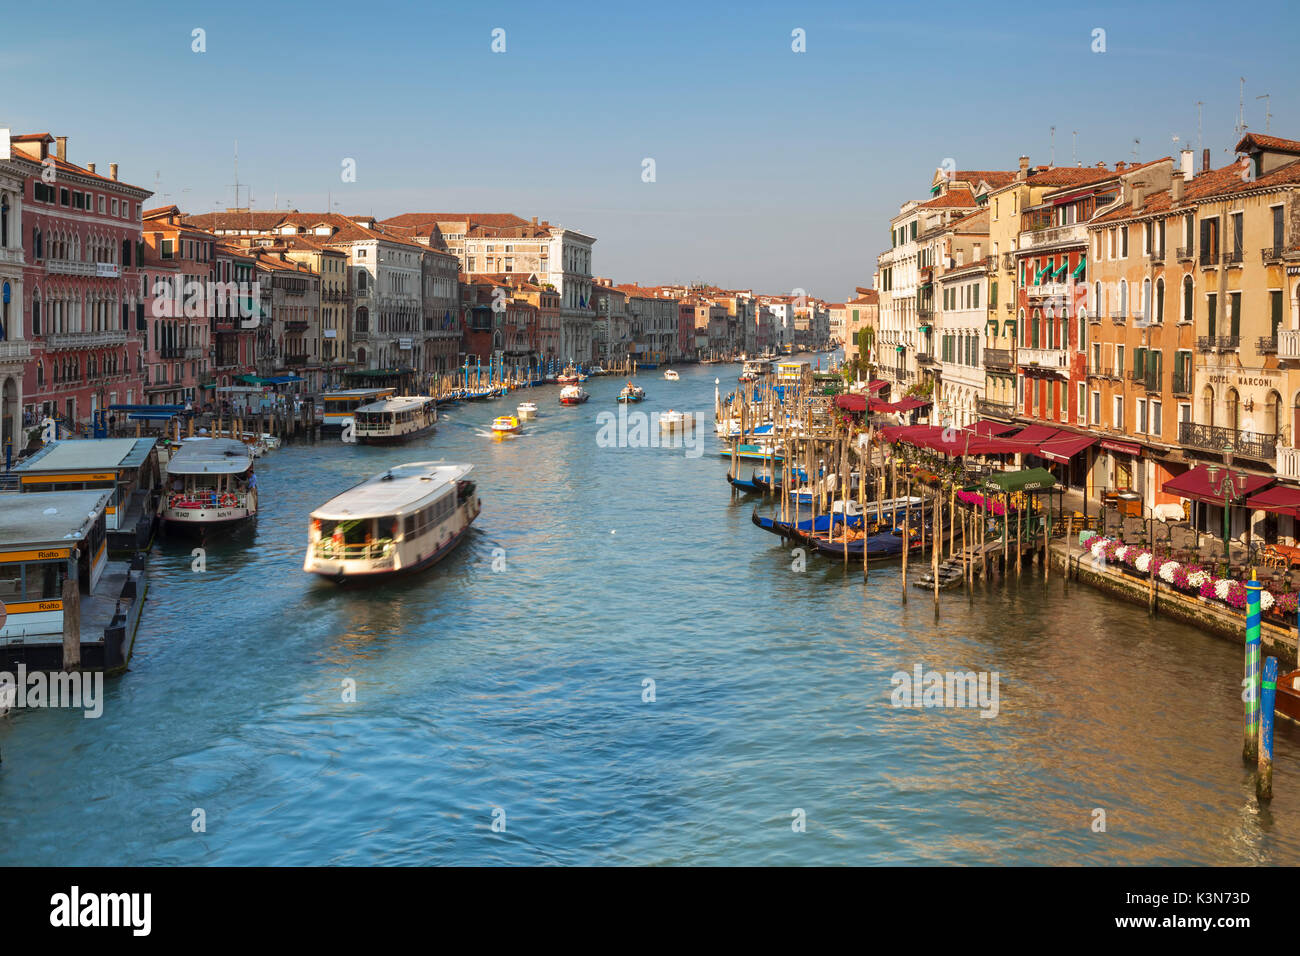 Venice, Italy. View over the Grand Canal with gondolas and vaporetti as seen from the Rialto Bridge in the sun light. Stock Photo